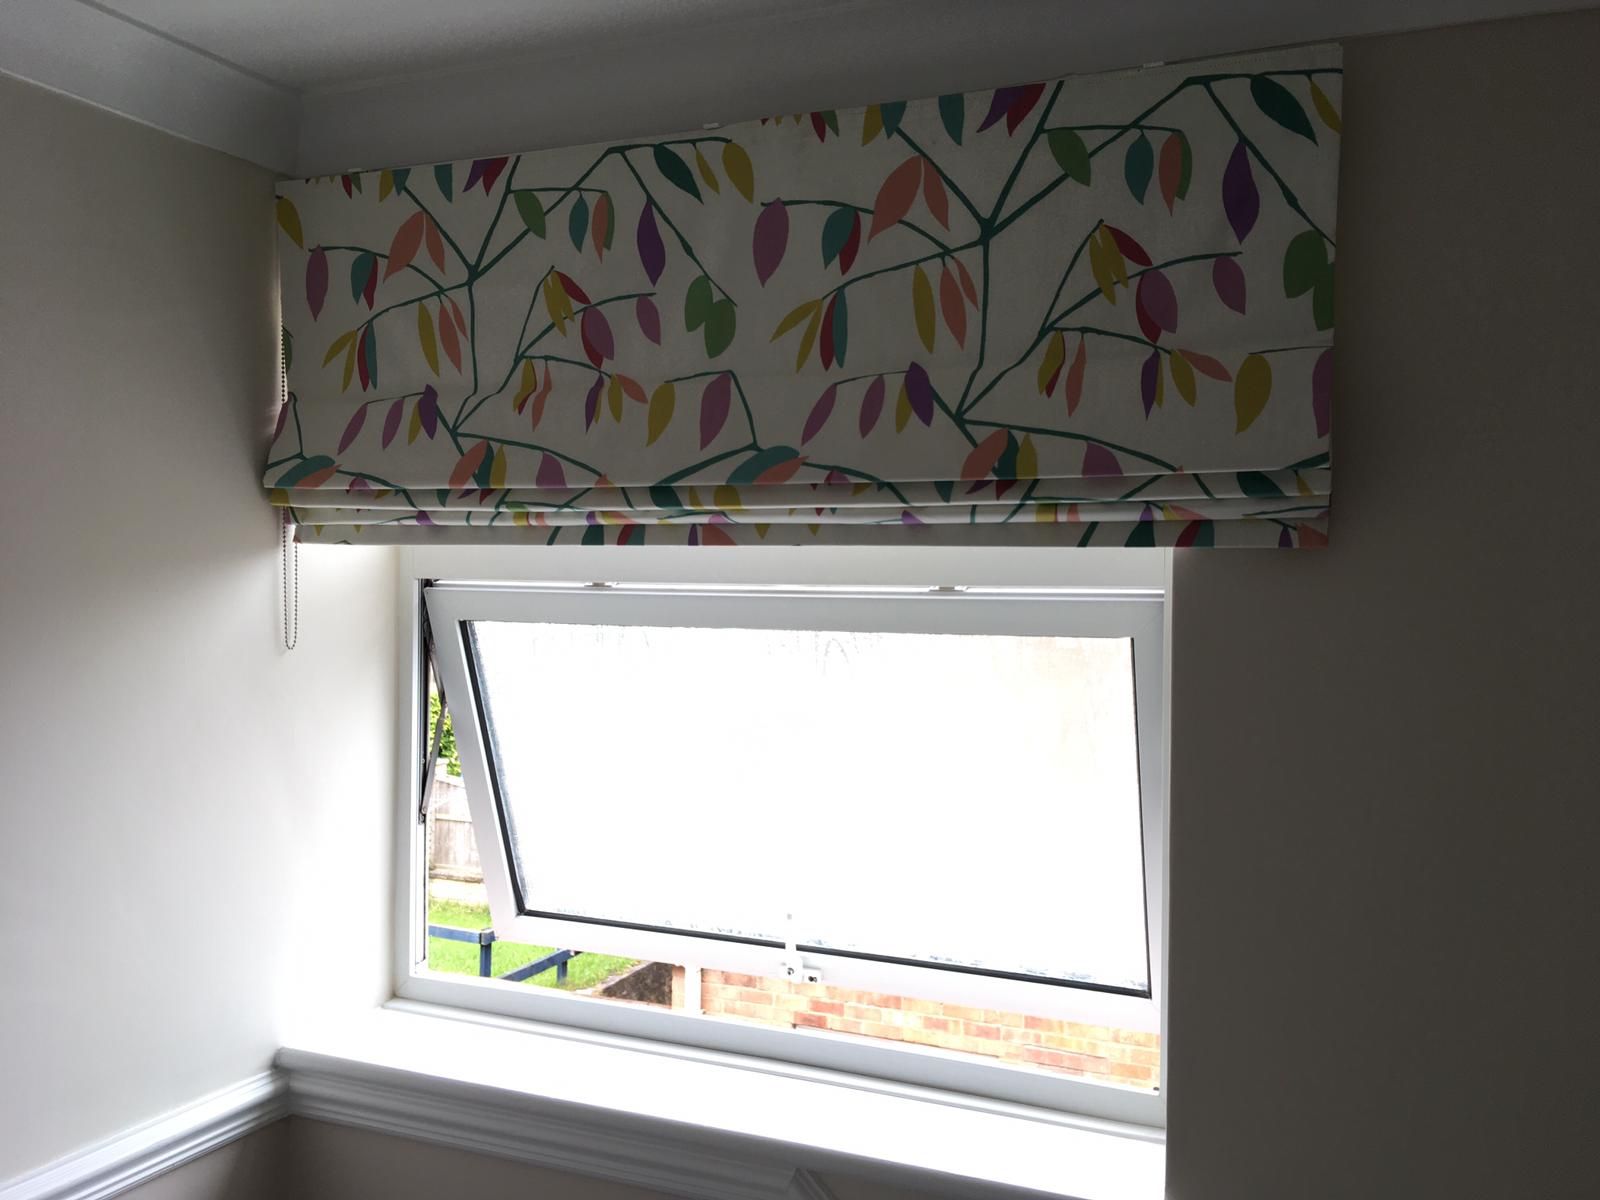 Suppliers of Roman Blinds With No Stitch Holes Option UK